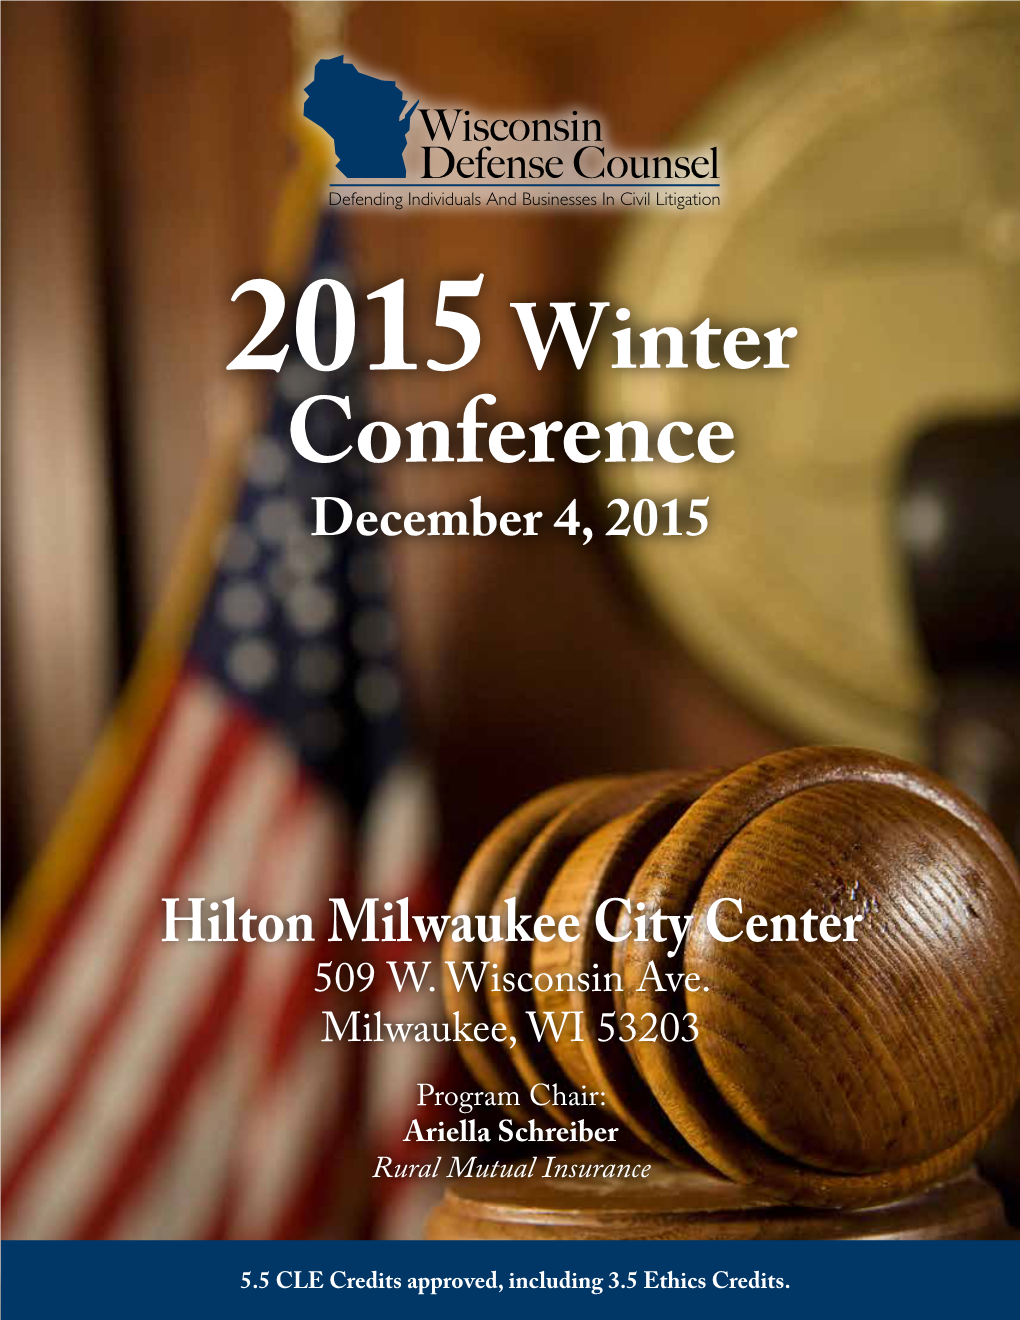 Wisconsin Defense Counsel Defending Individuals and Businesses in Civil Litigation